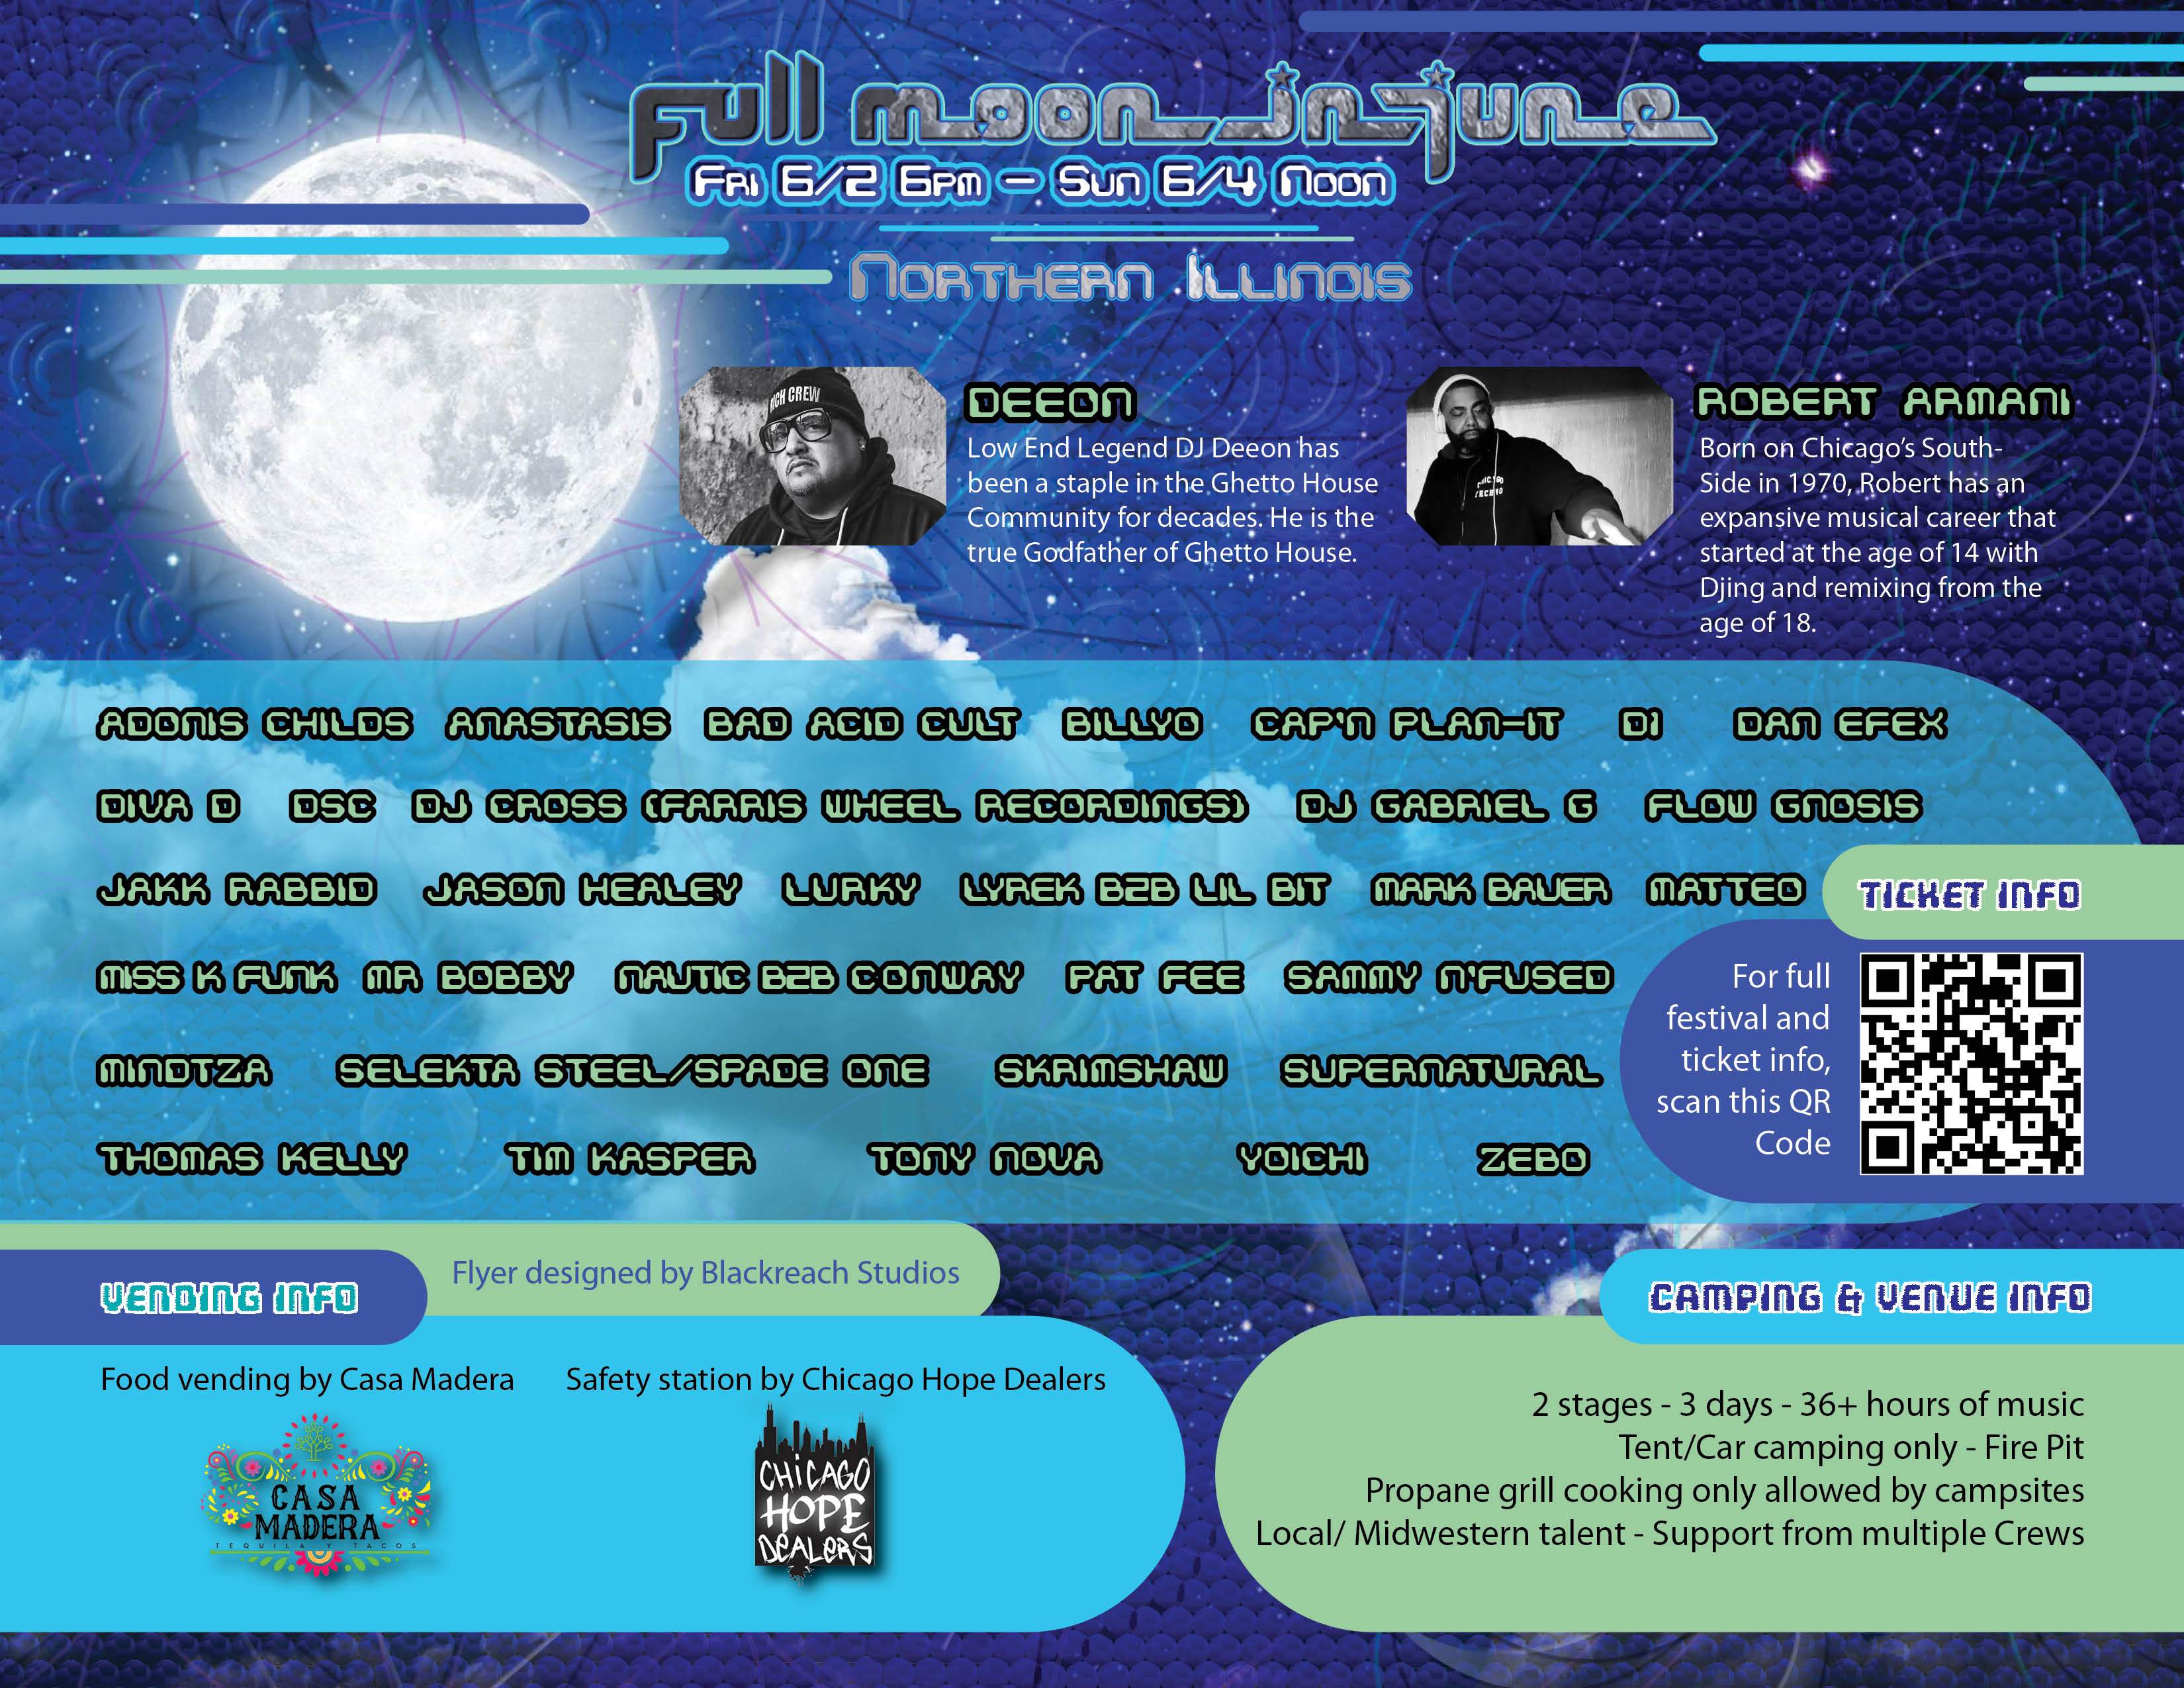 Full Moon in June Campout Festival - フライヤー裏